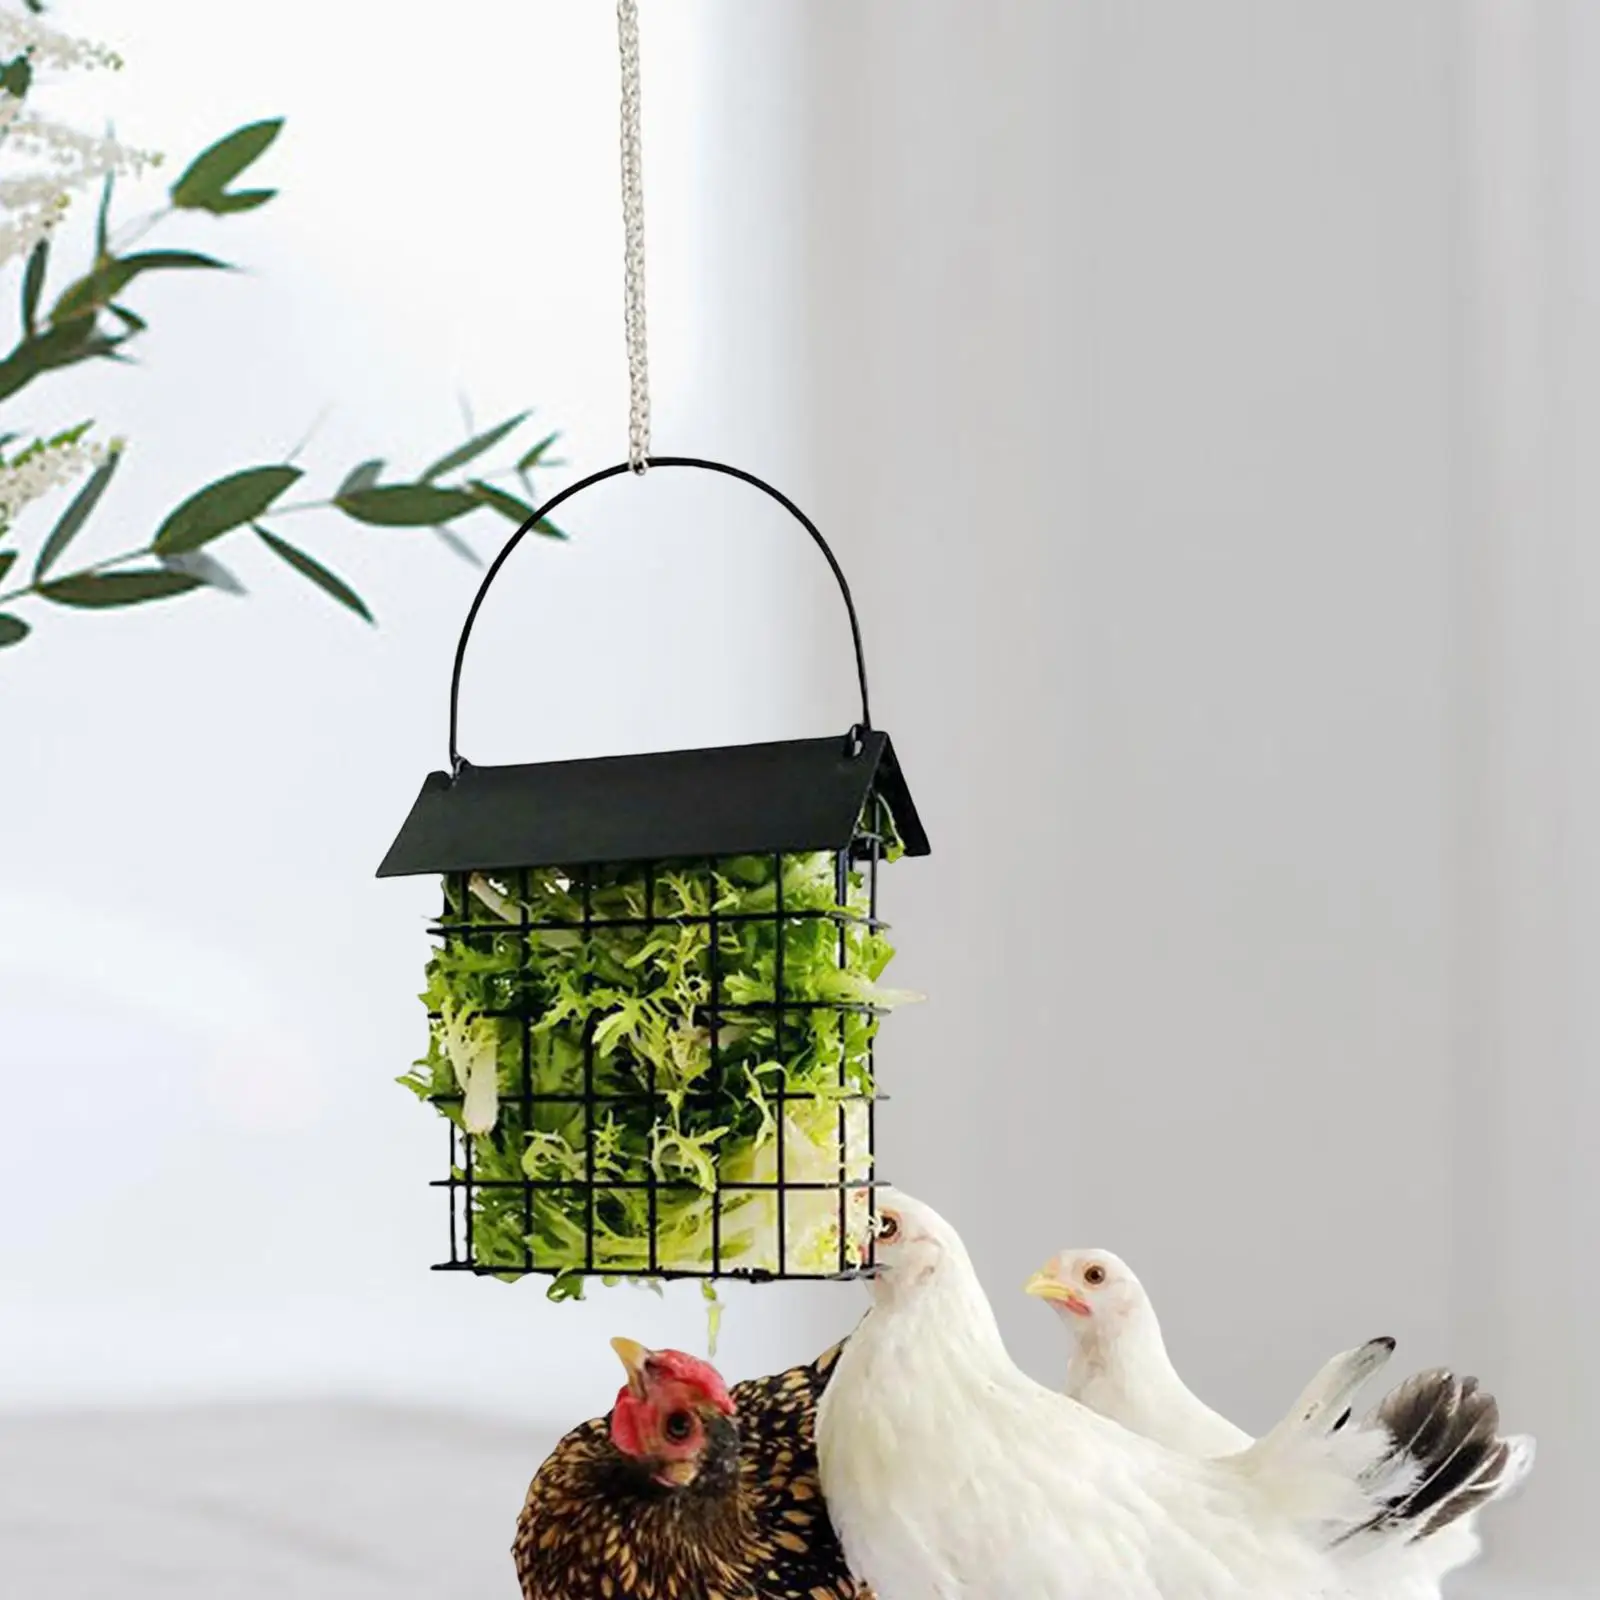 Suet Cake Bird Feeders Hanging Feeder for Hens Chicken Toy Treat Feeding Tool Poultry Fruit for Cabbage Lettuce Veggies